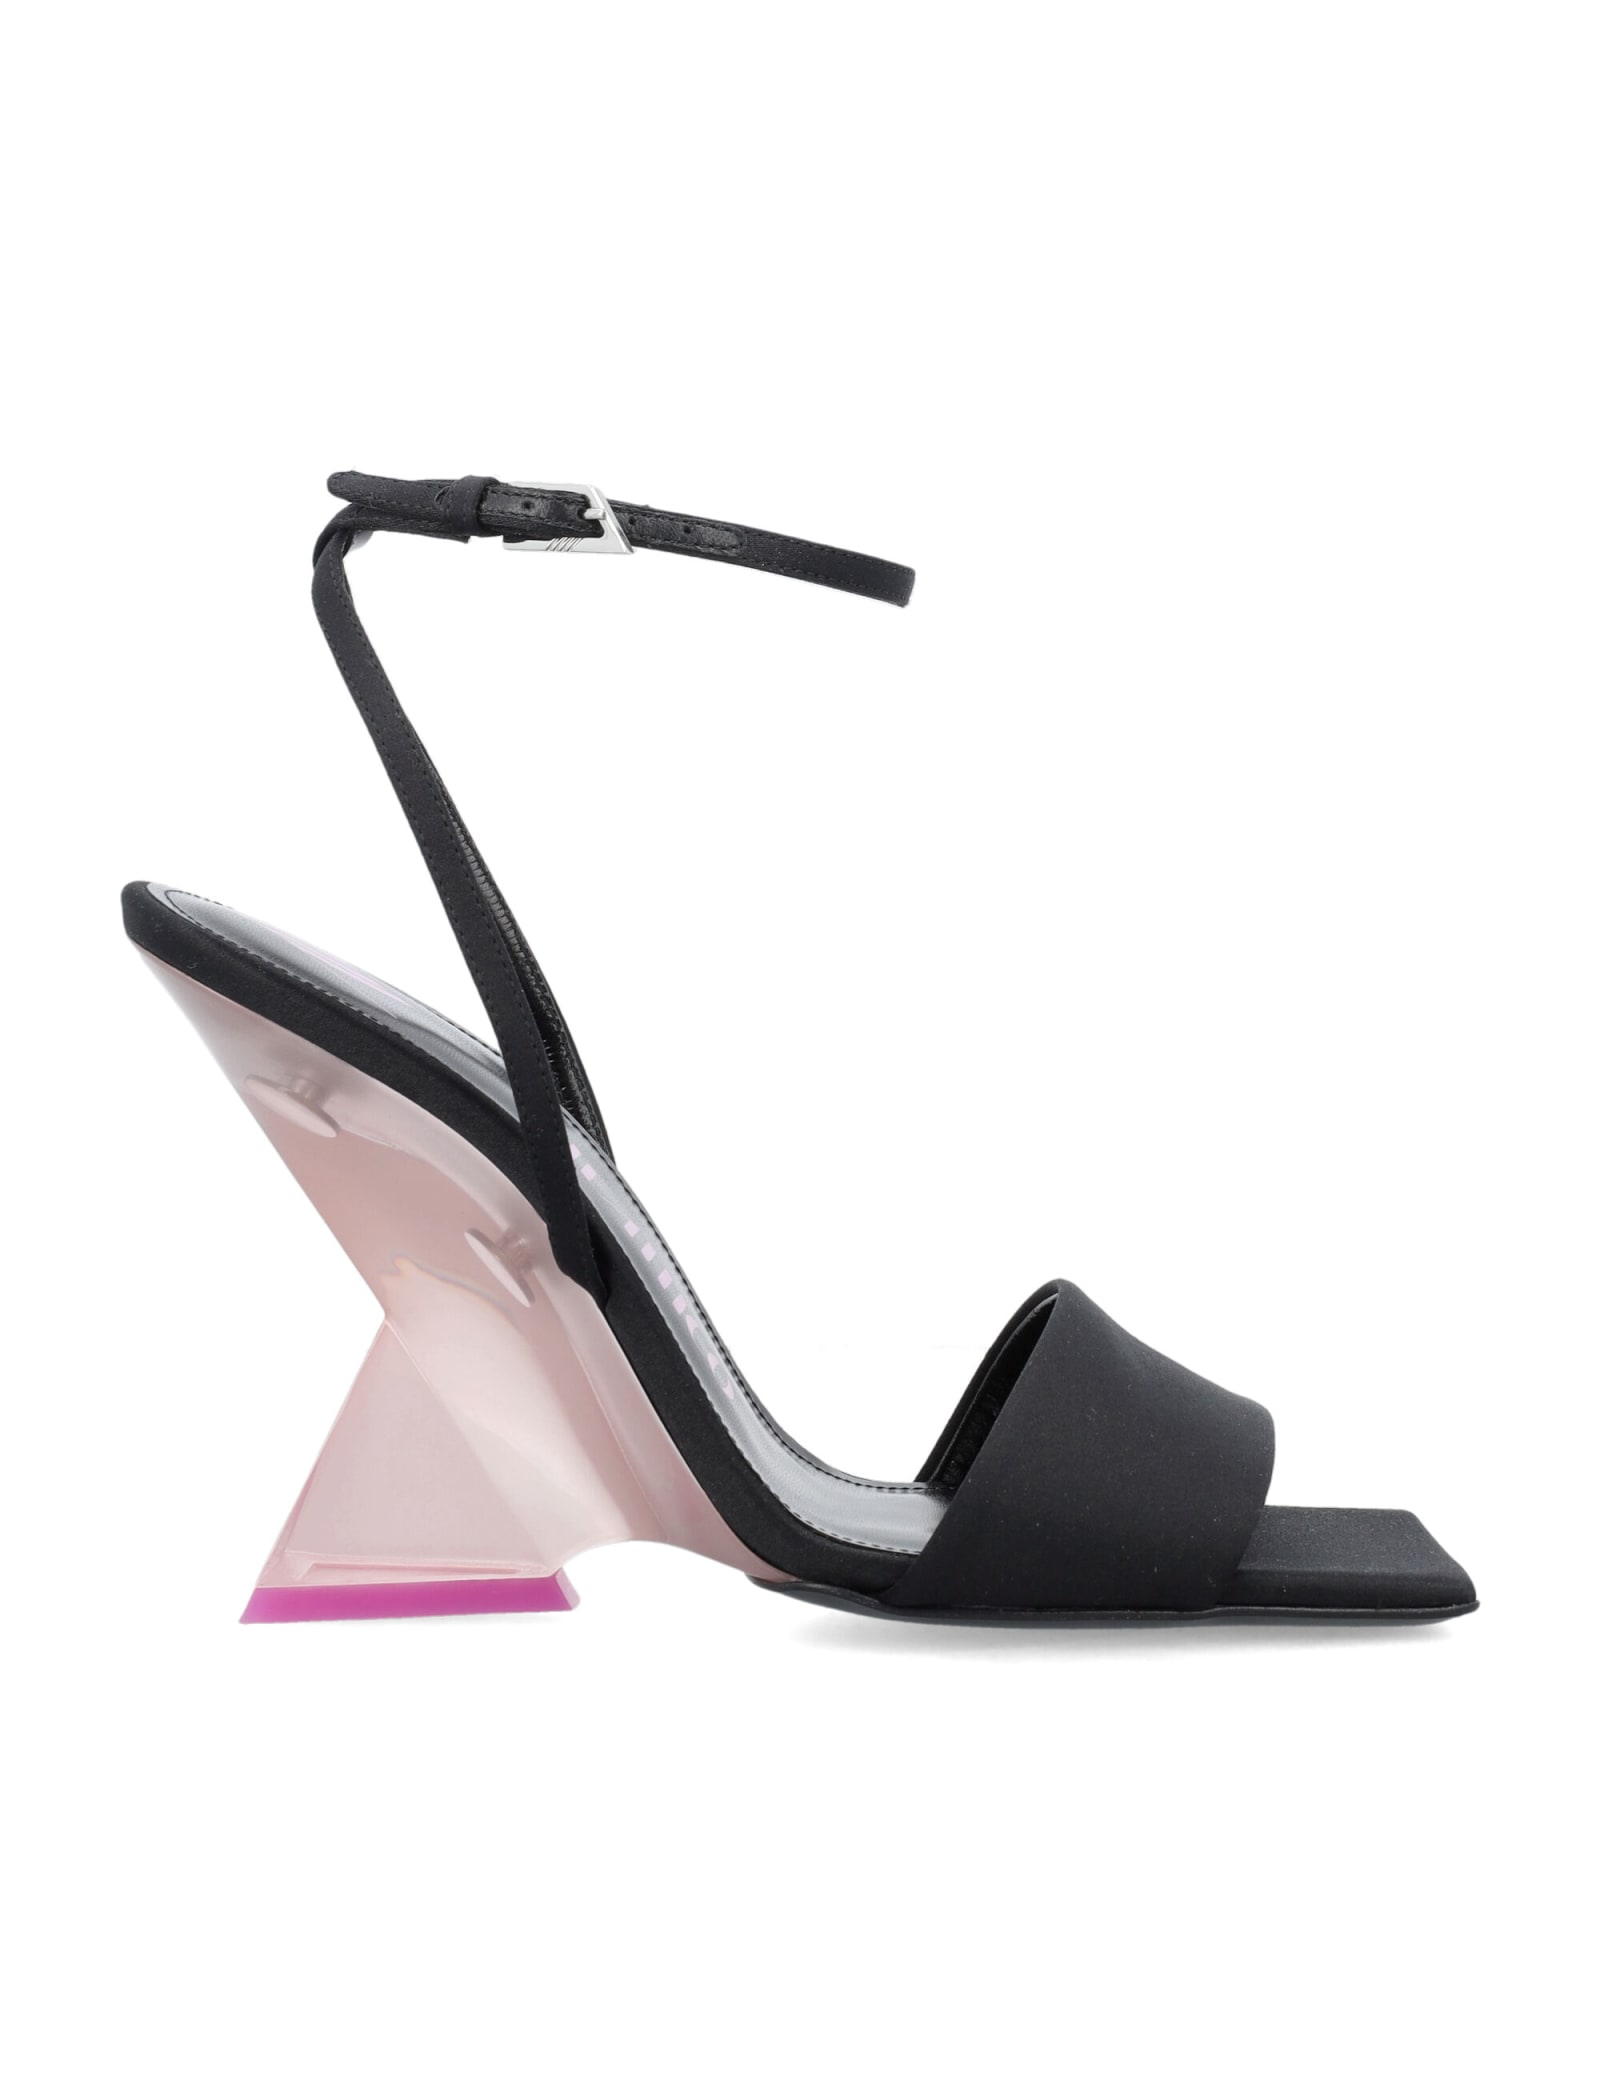 Cheope Black And Pink Sandals